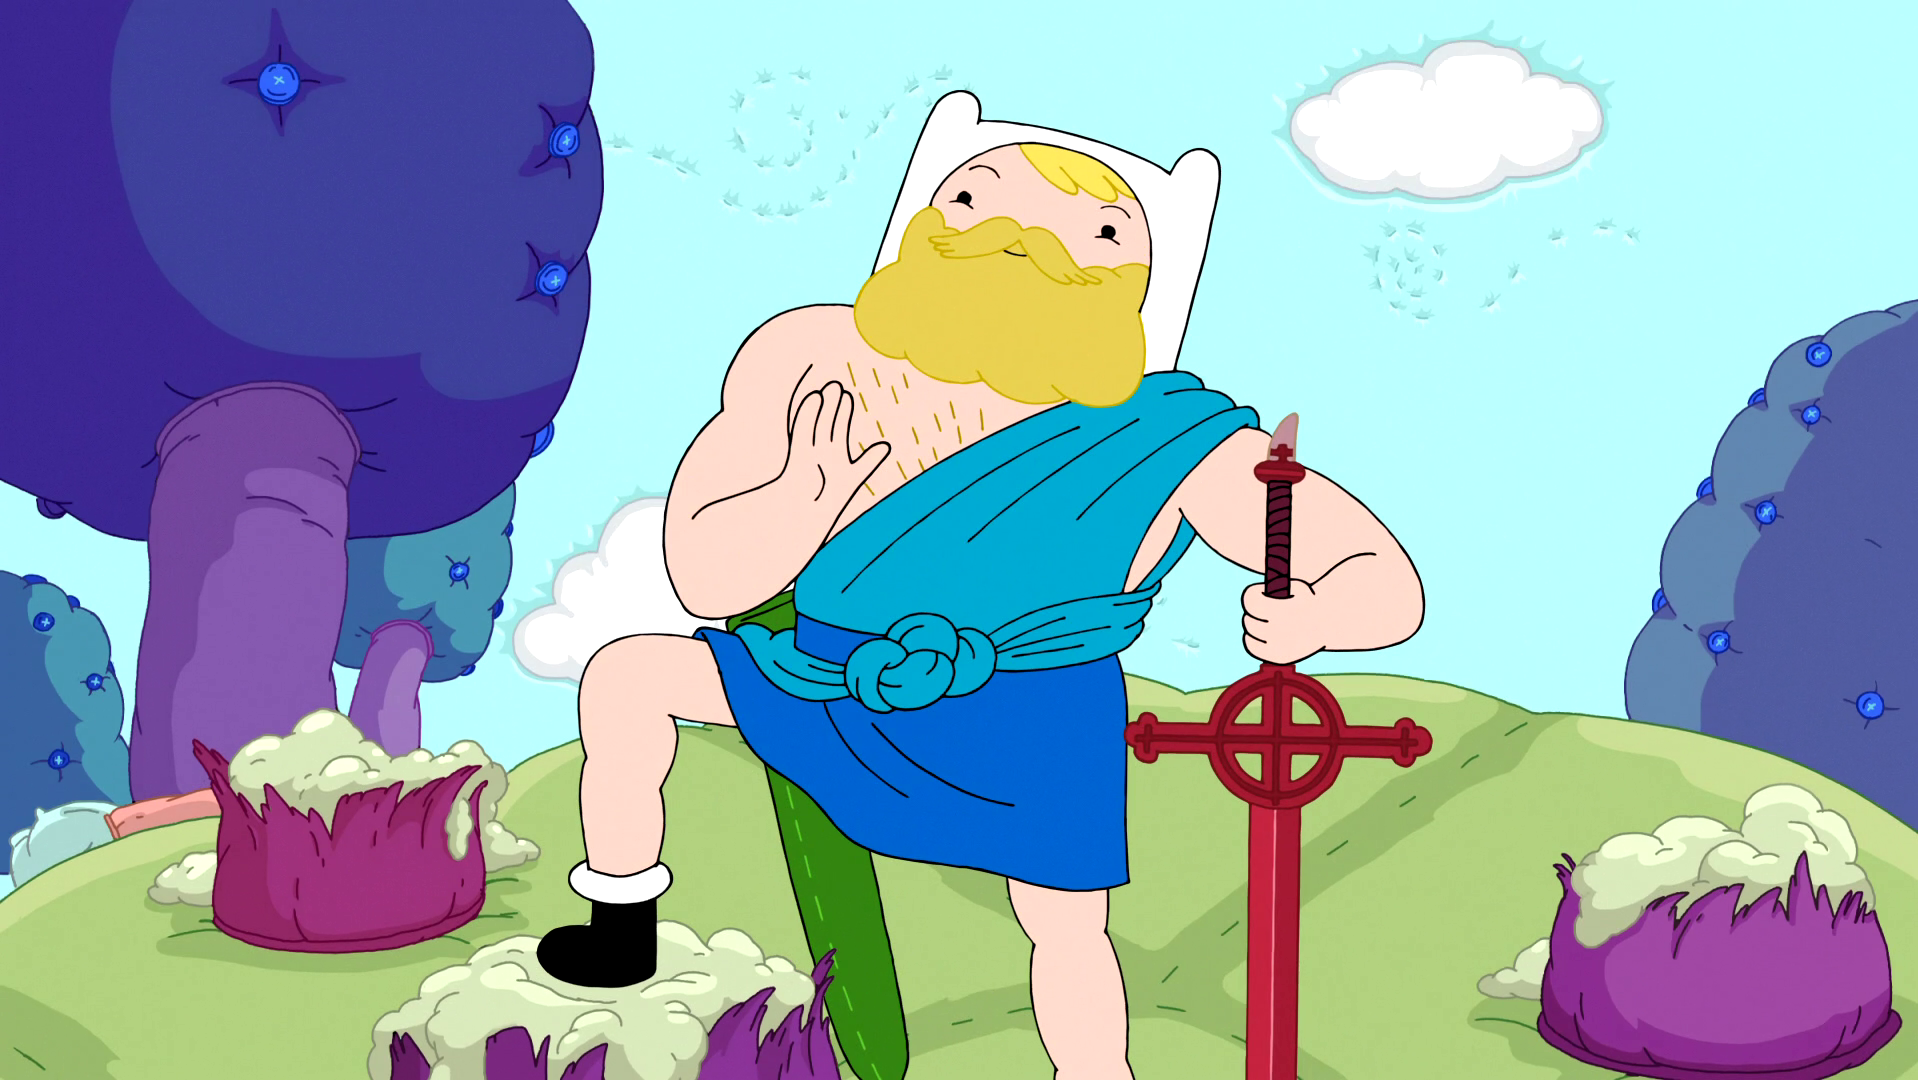 Image S5e16 Adult Finn Png The Adventure Time Wiki Mathematical